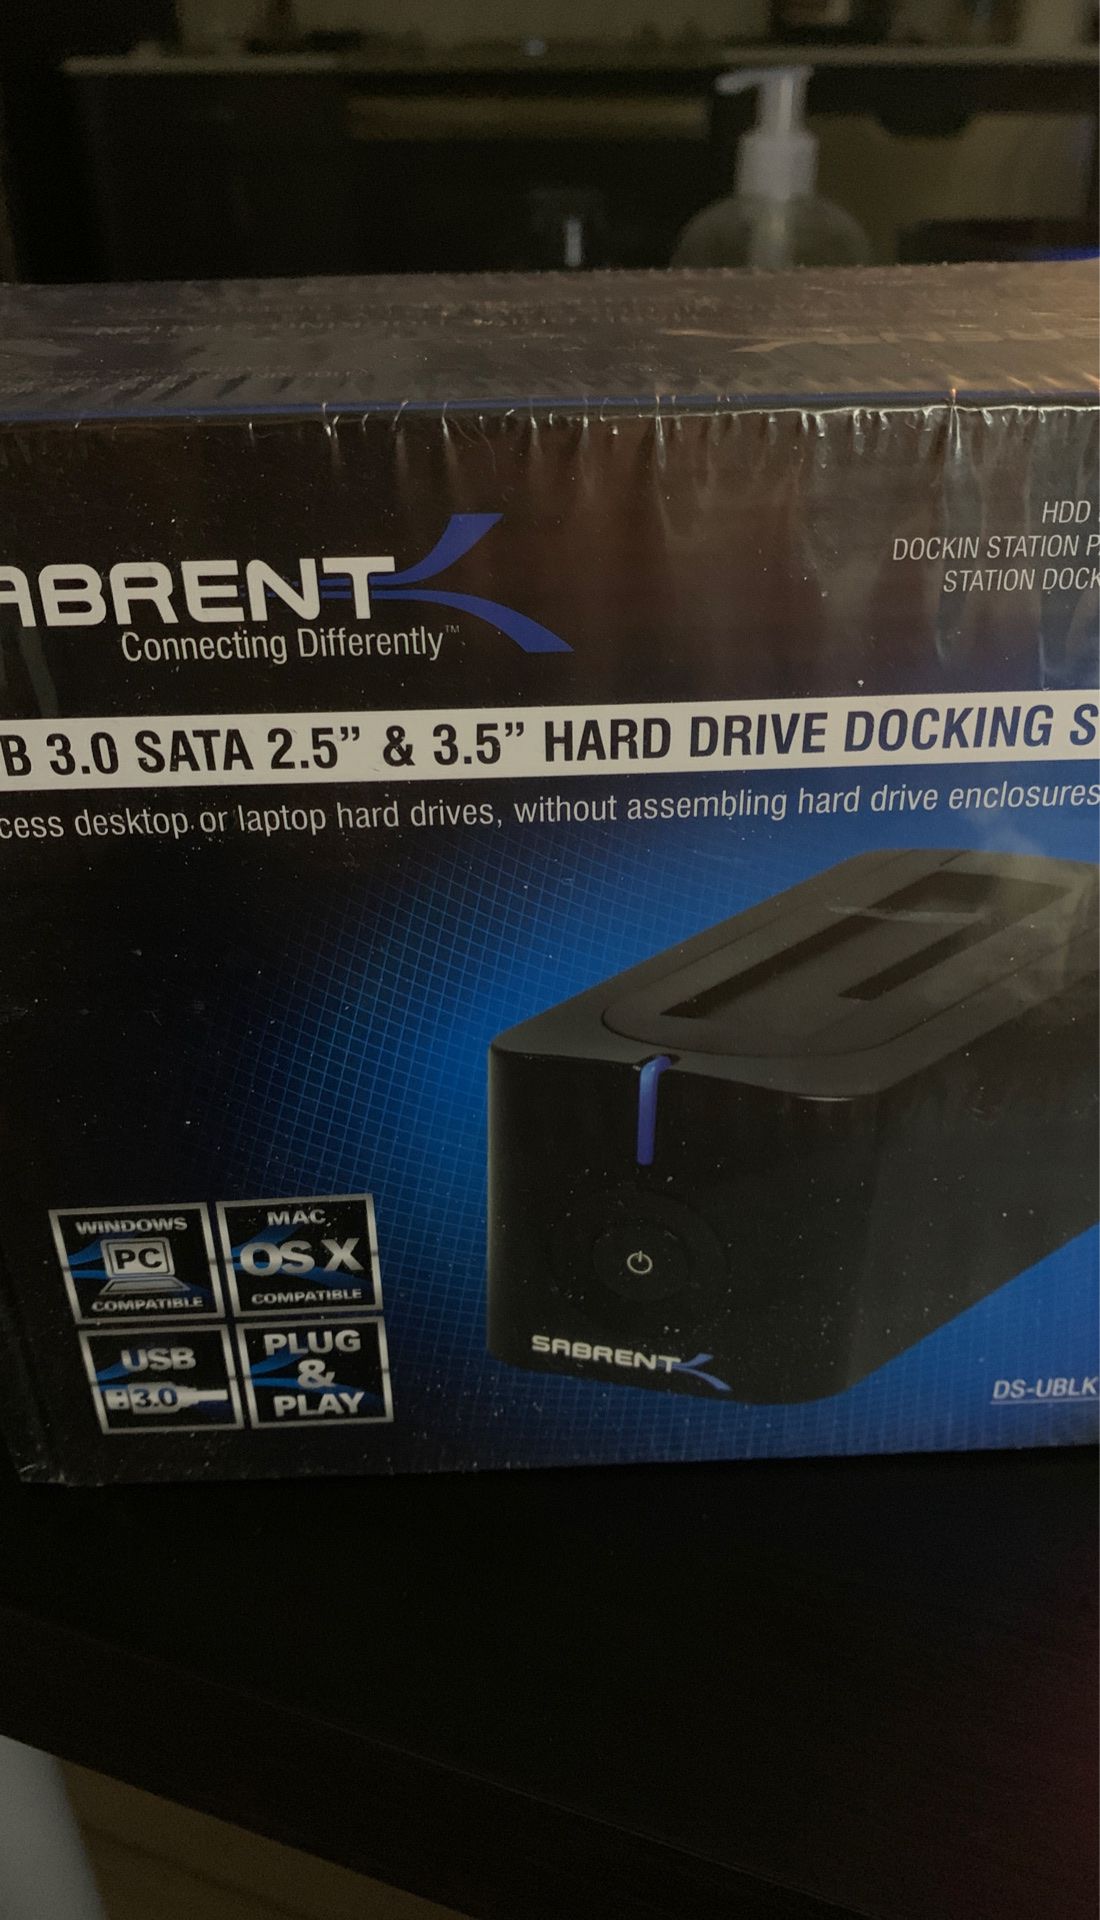 HDD Docking Station for Extra Space, Copy Disk